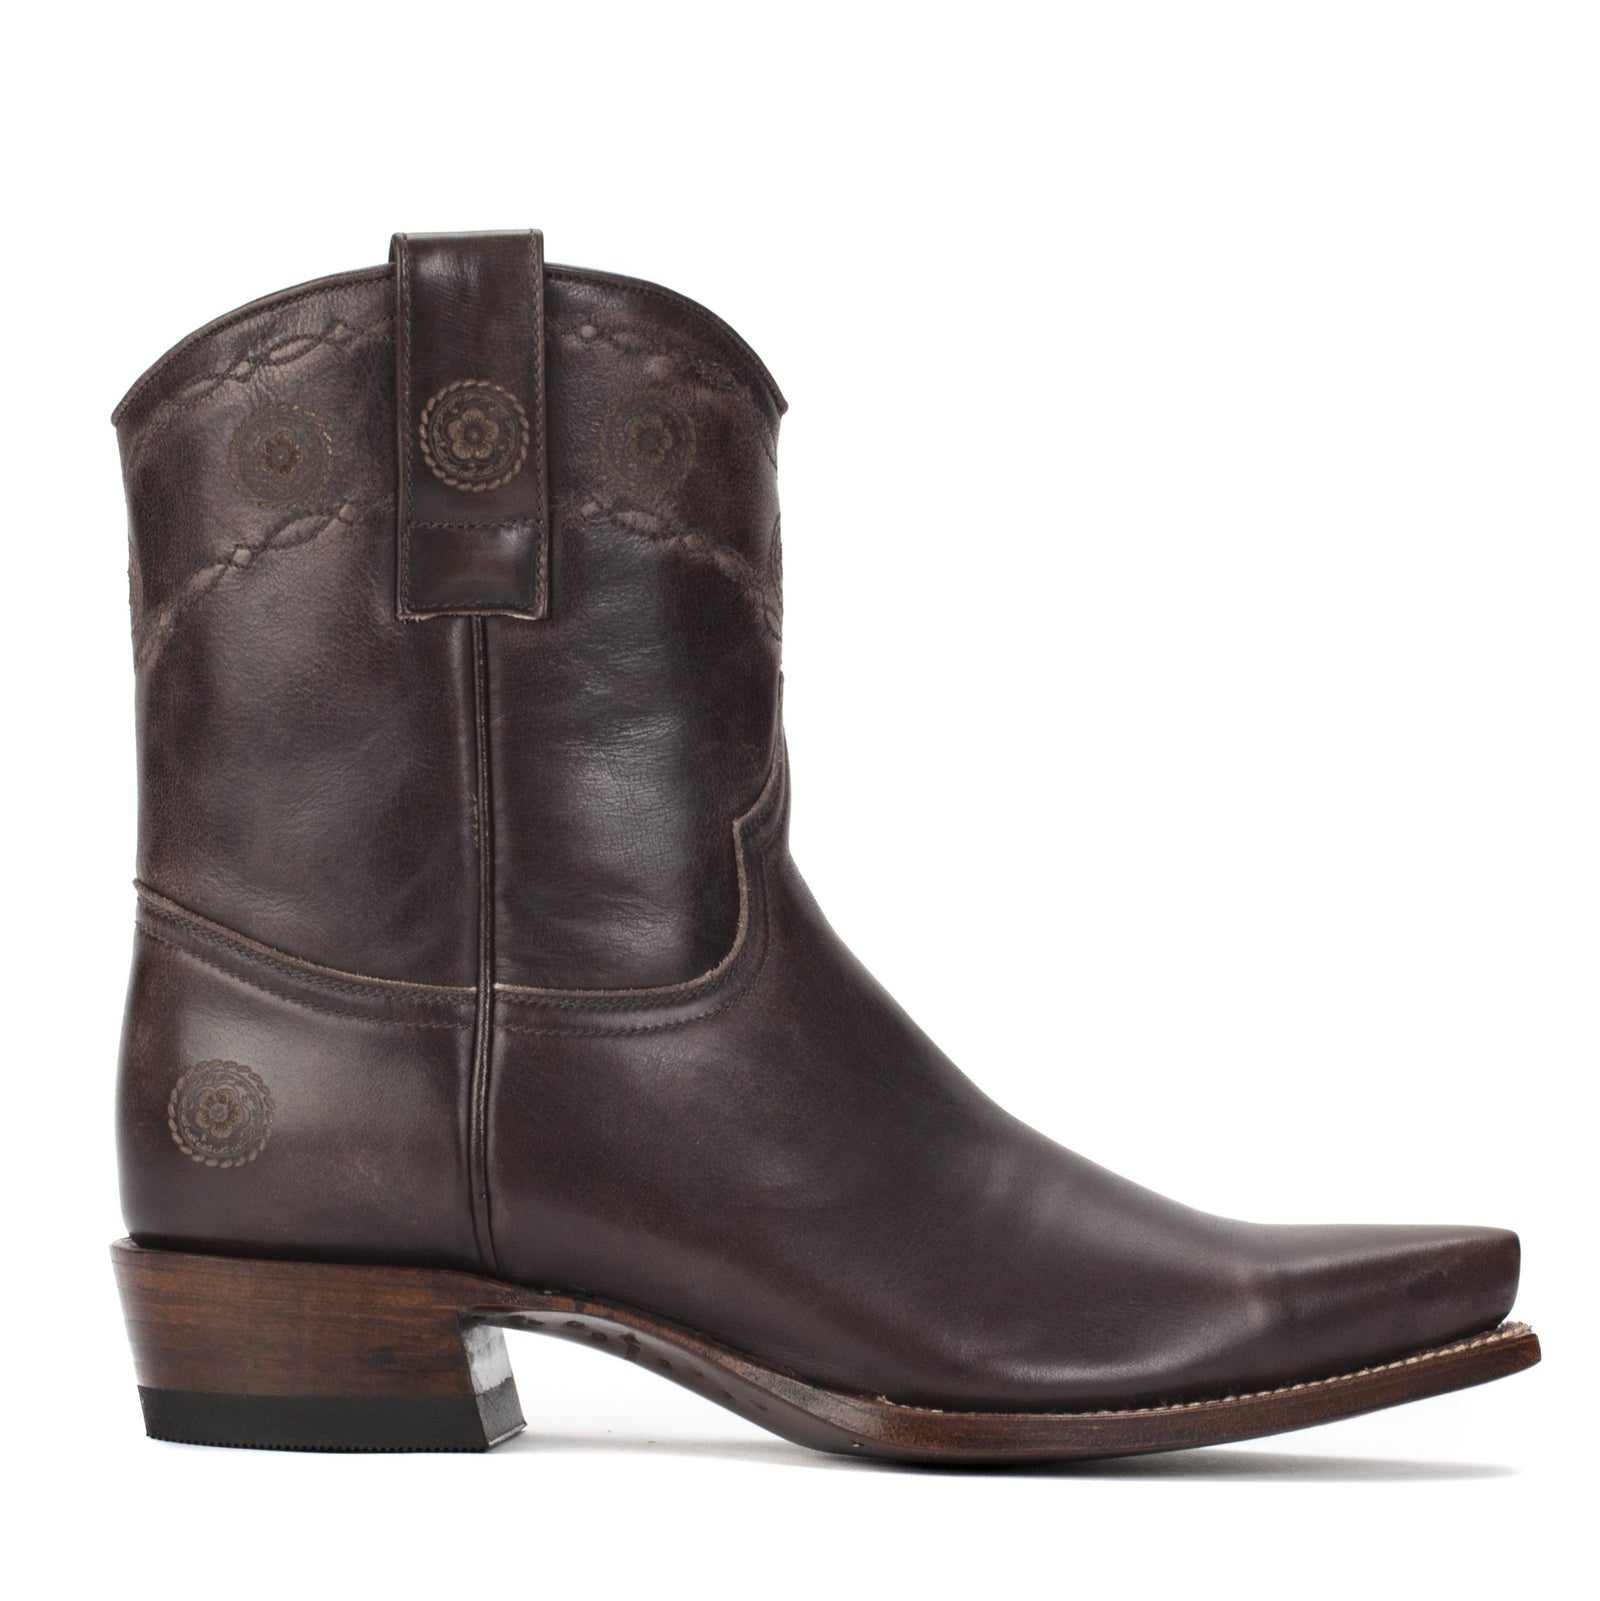 Luxury Handcrafted Leather Ranch Boots Womens - Ranch Road Boots™